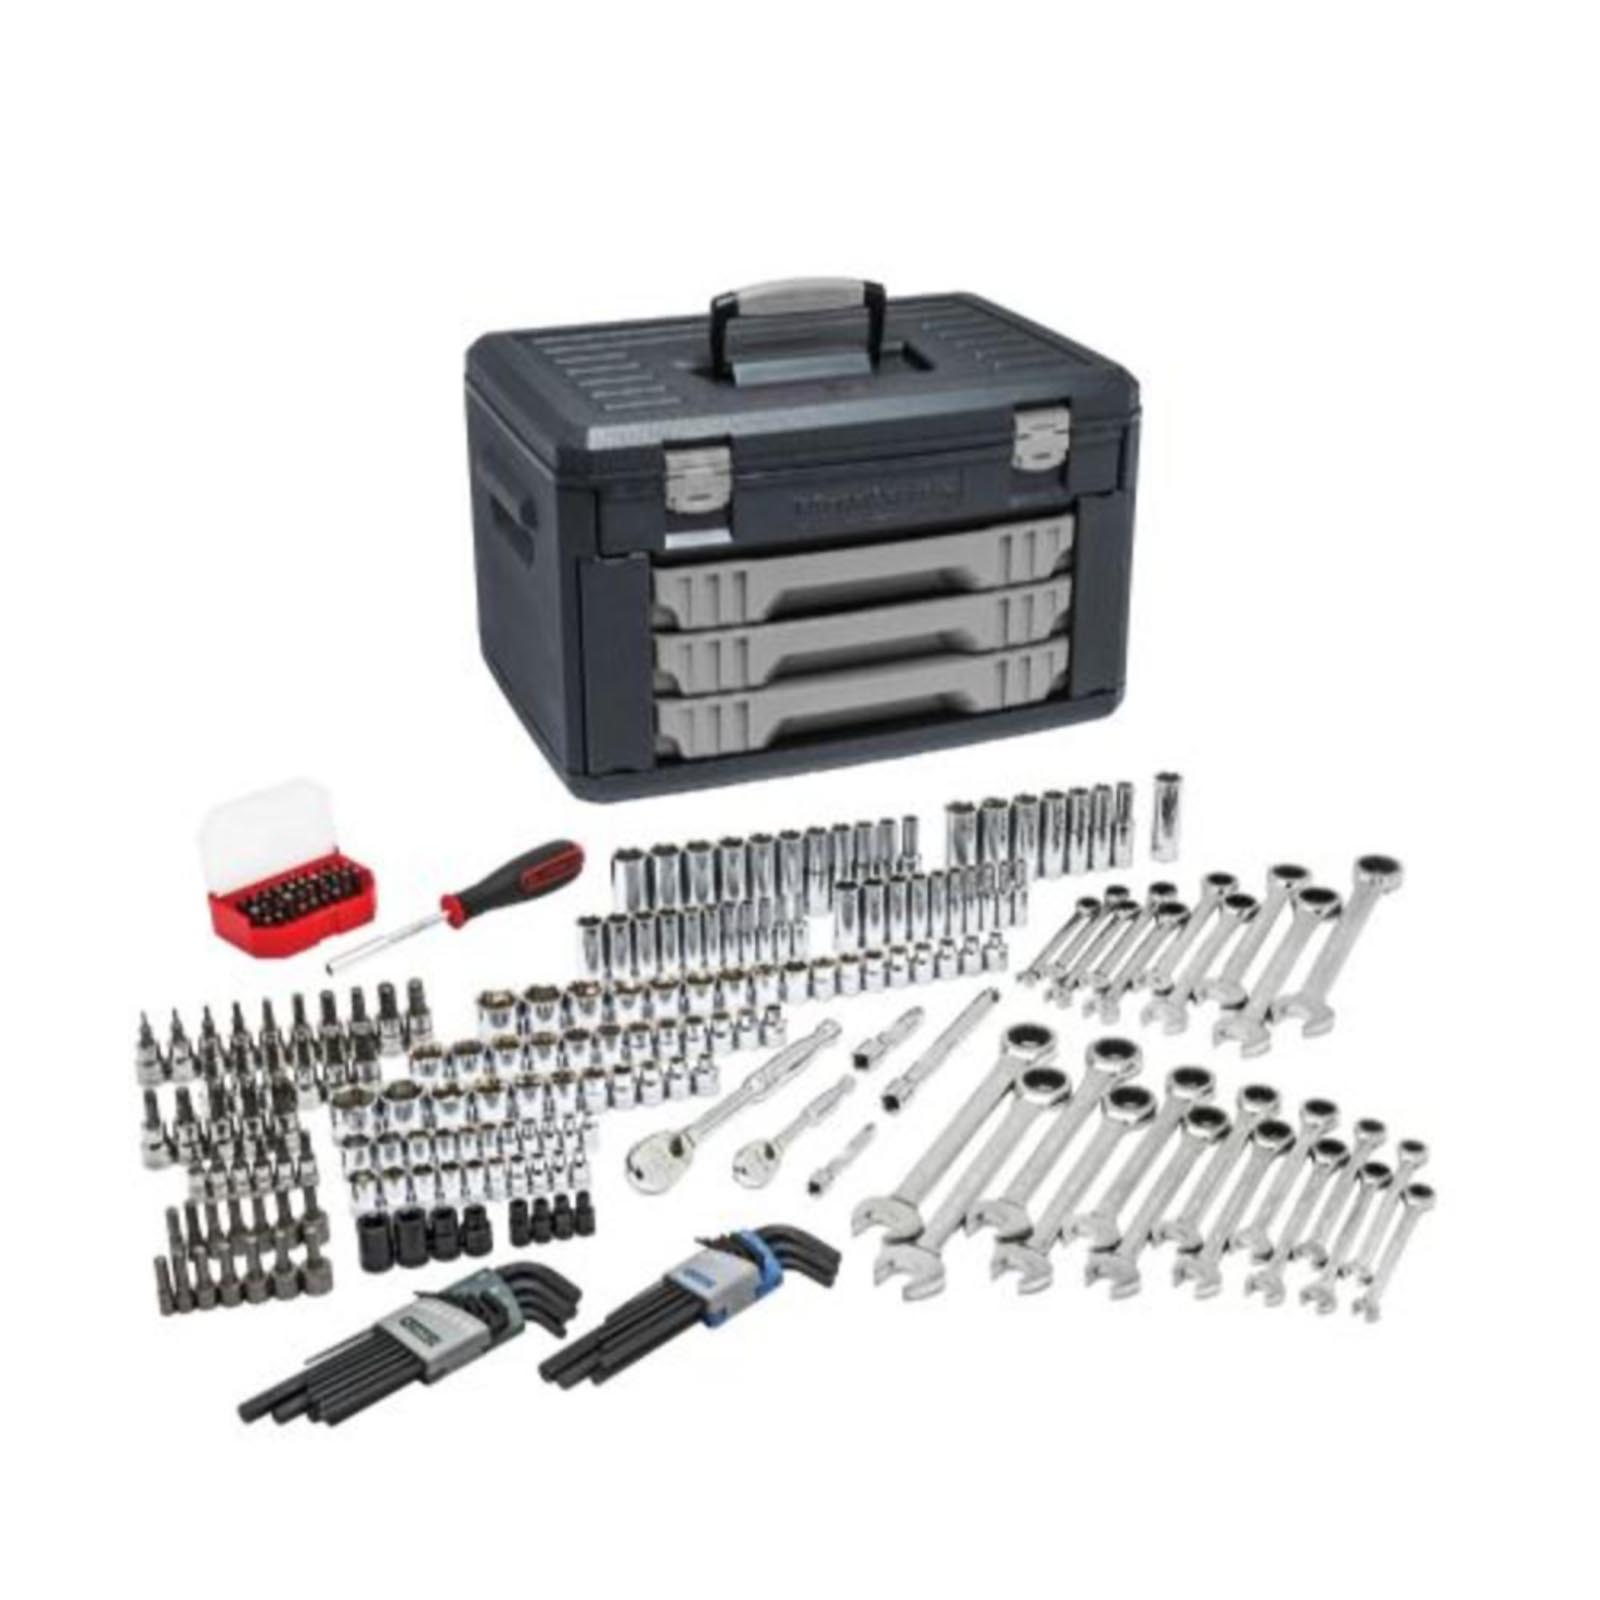 GearWrench 80944 232pc. 1/4" 3/8" Drive Metric & SAE Socket & Ratchet Set with Storage Box